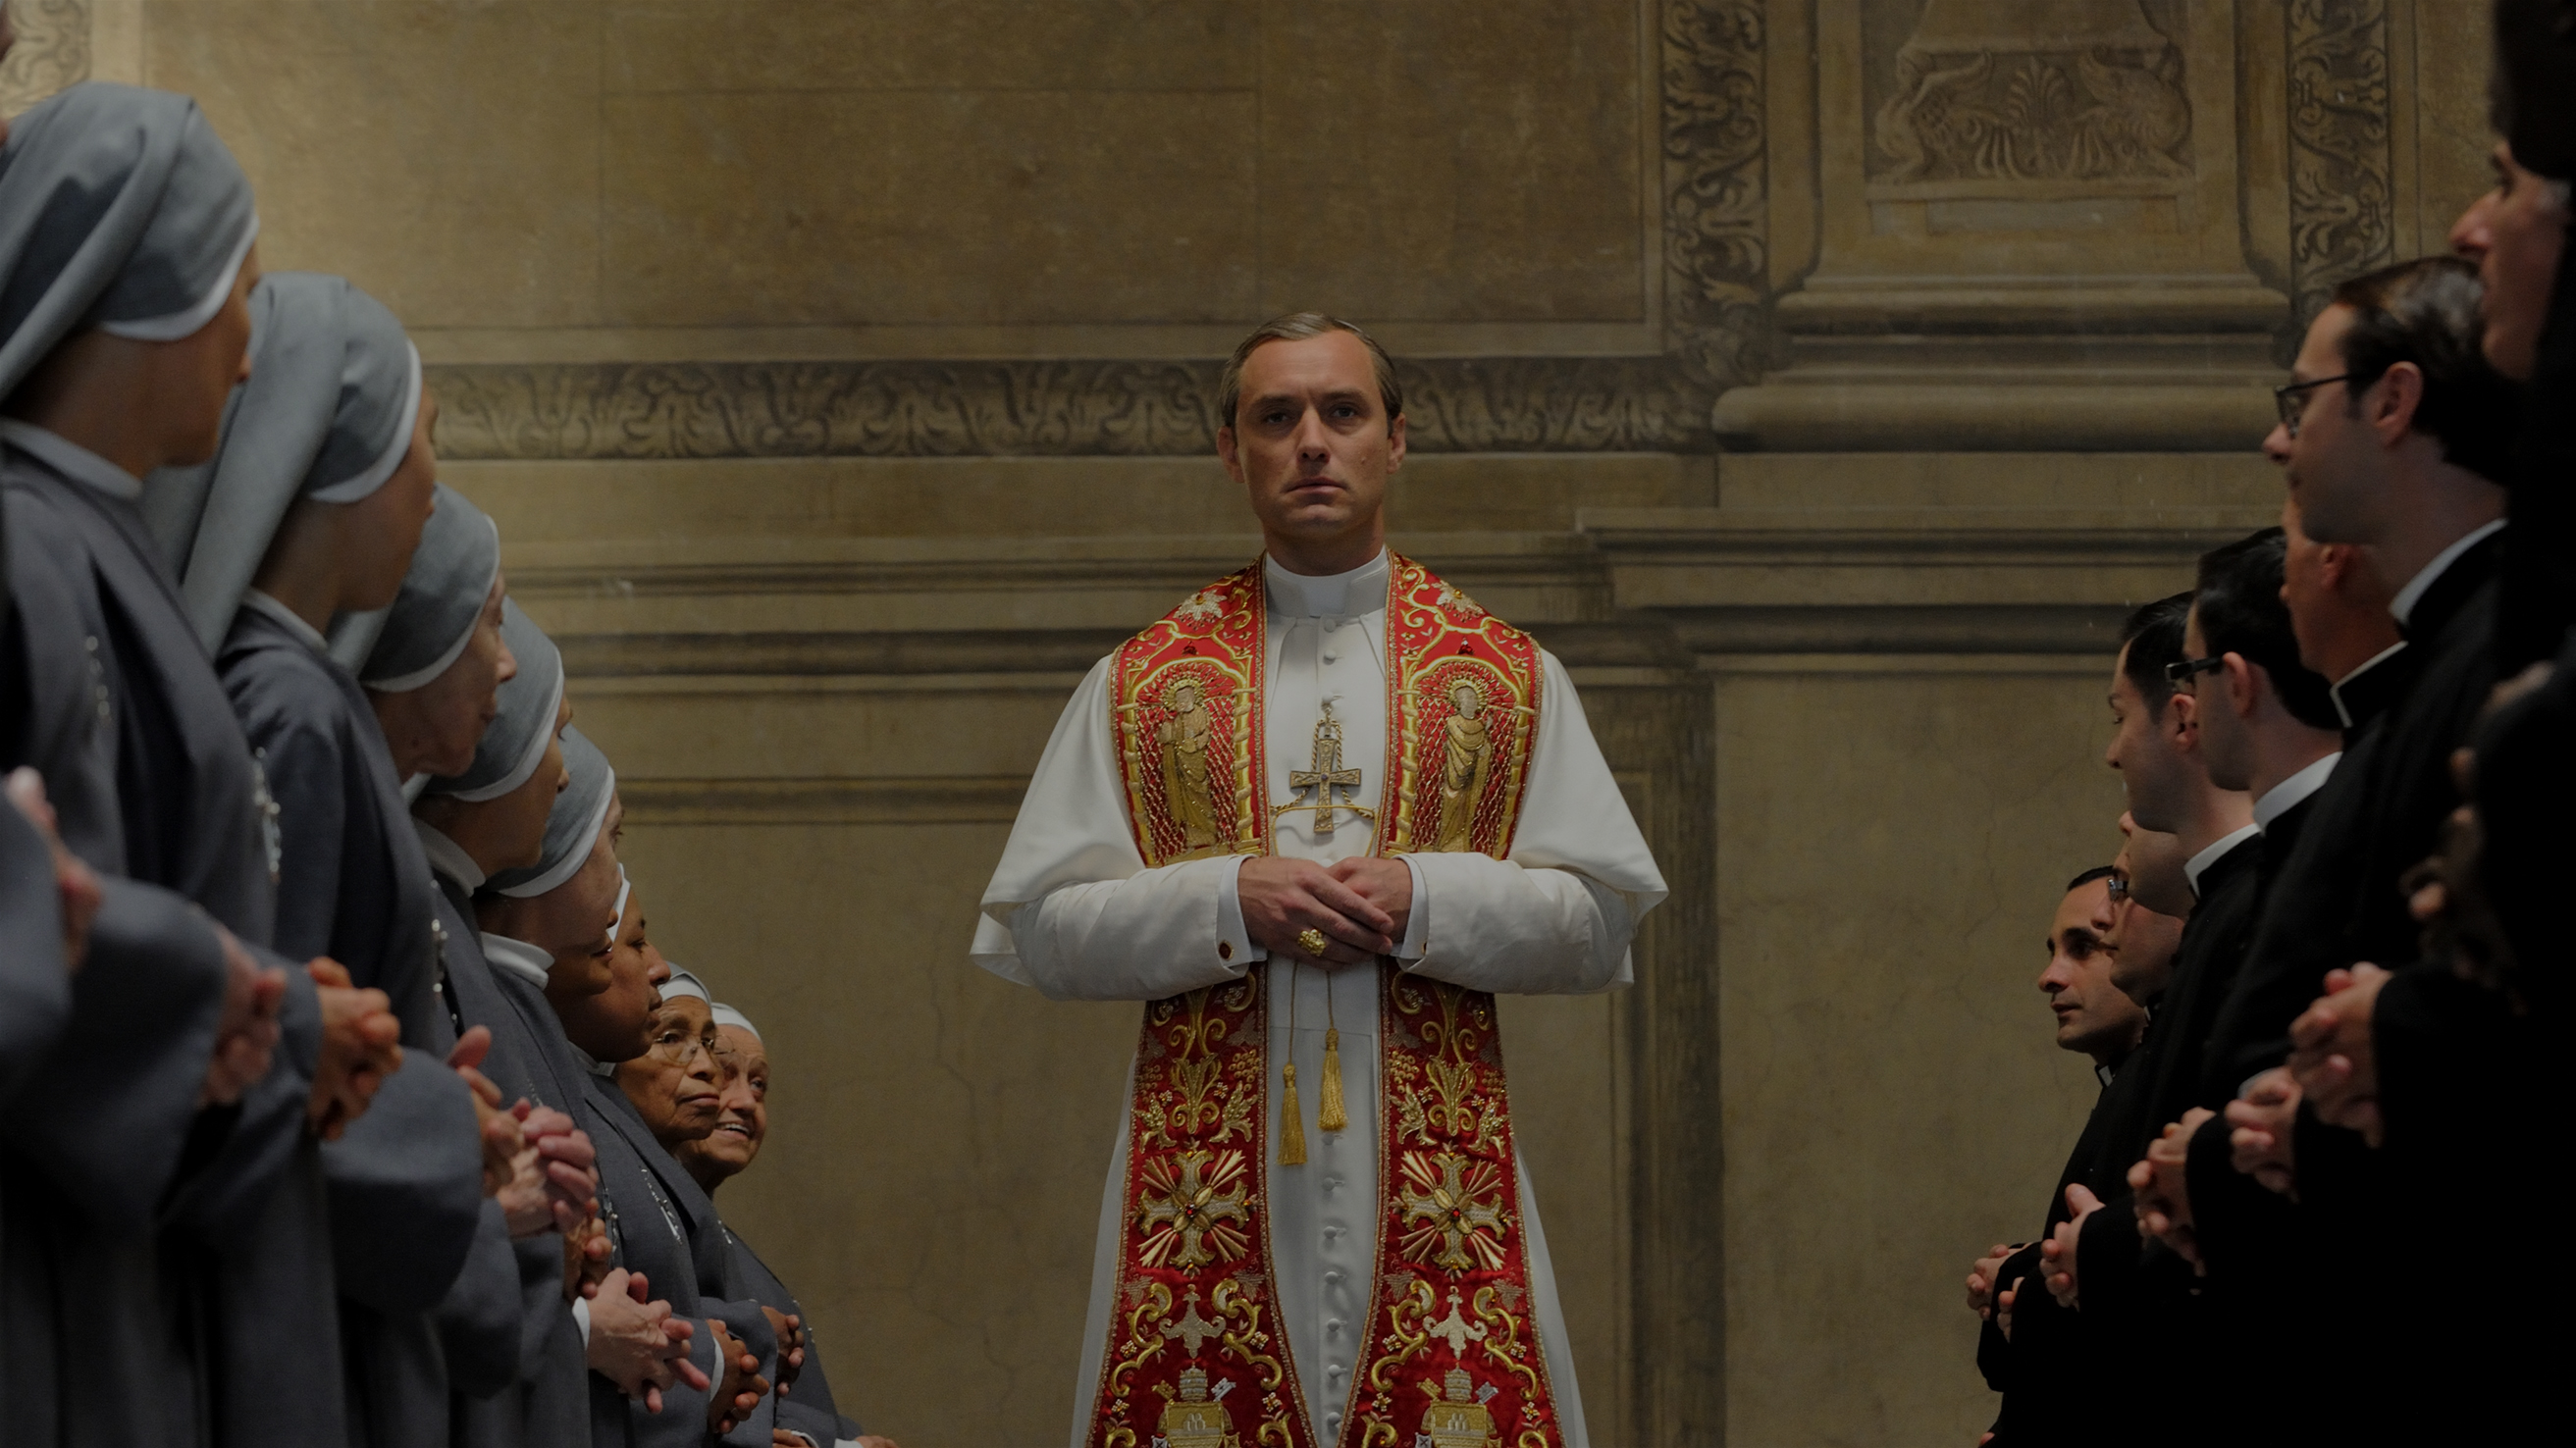 Paolo Sorrentino The young Pope